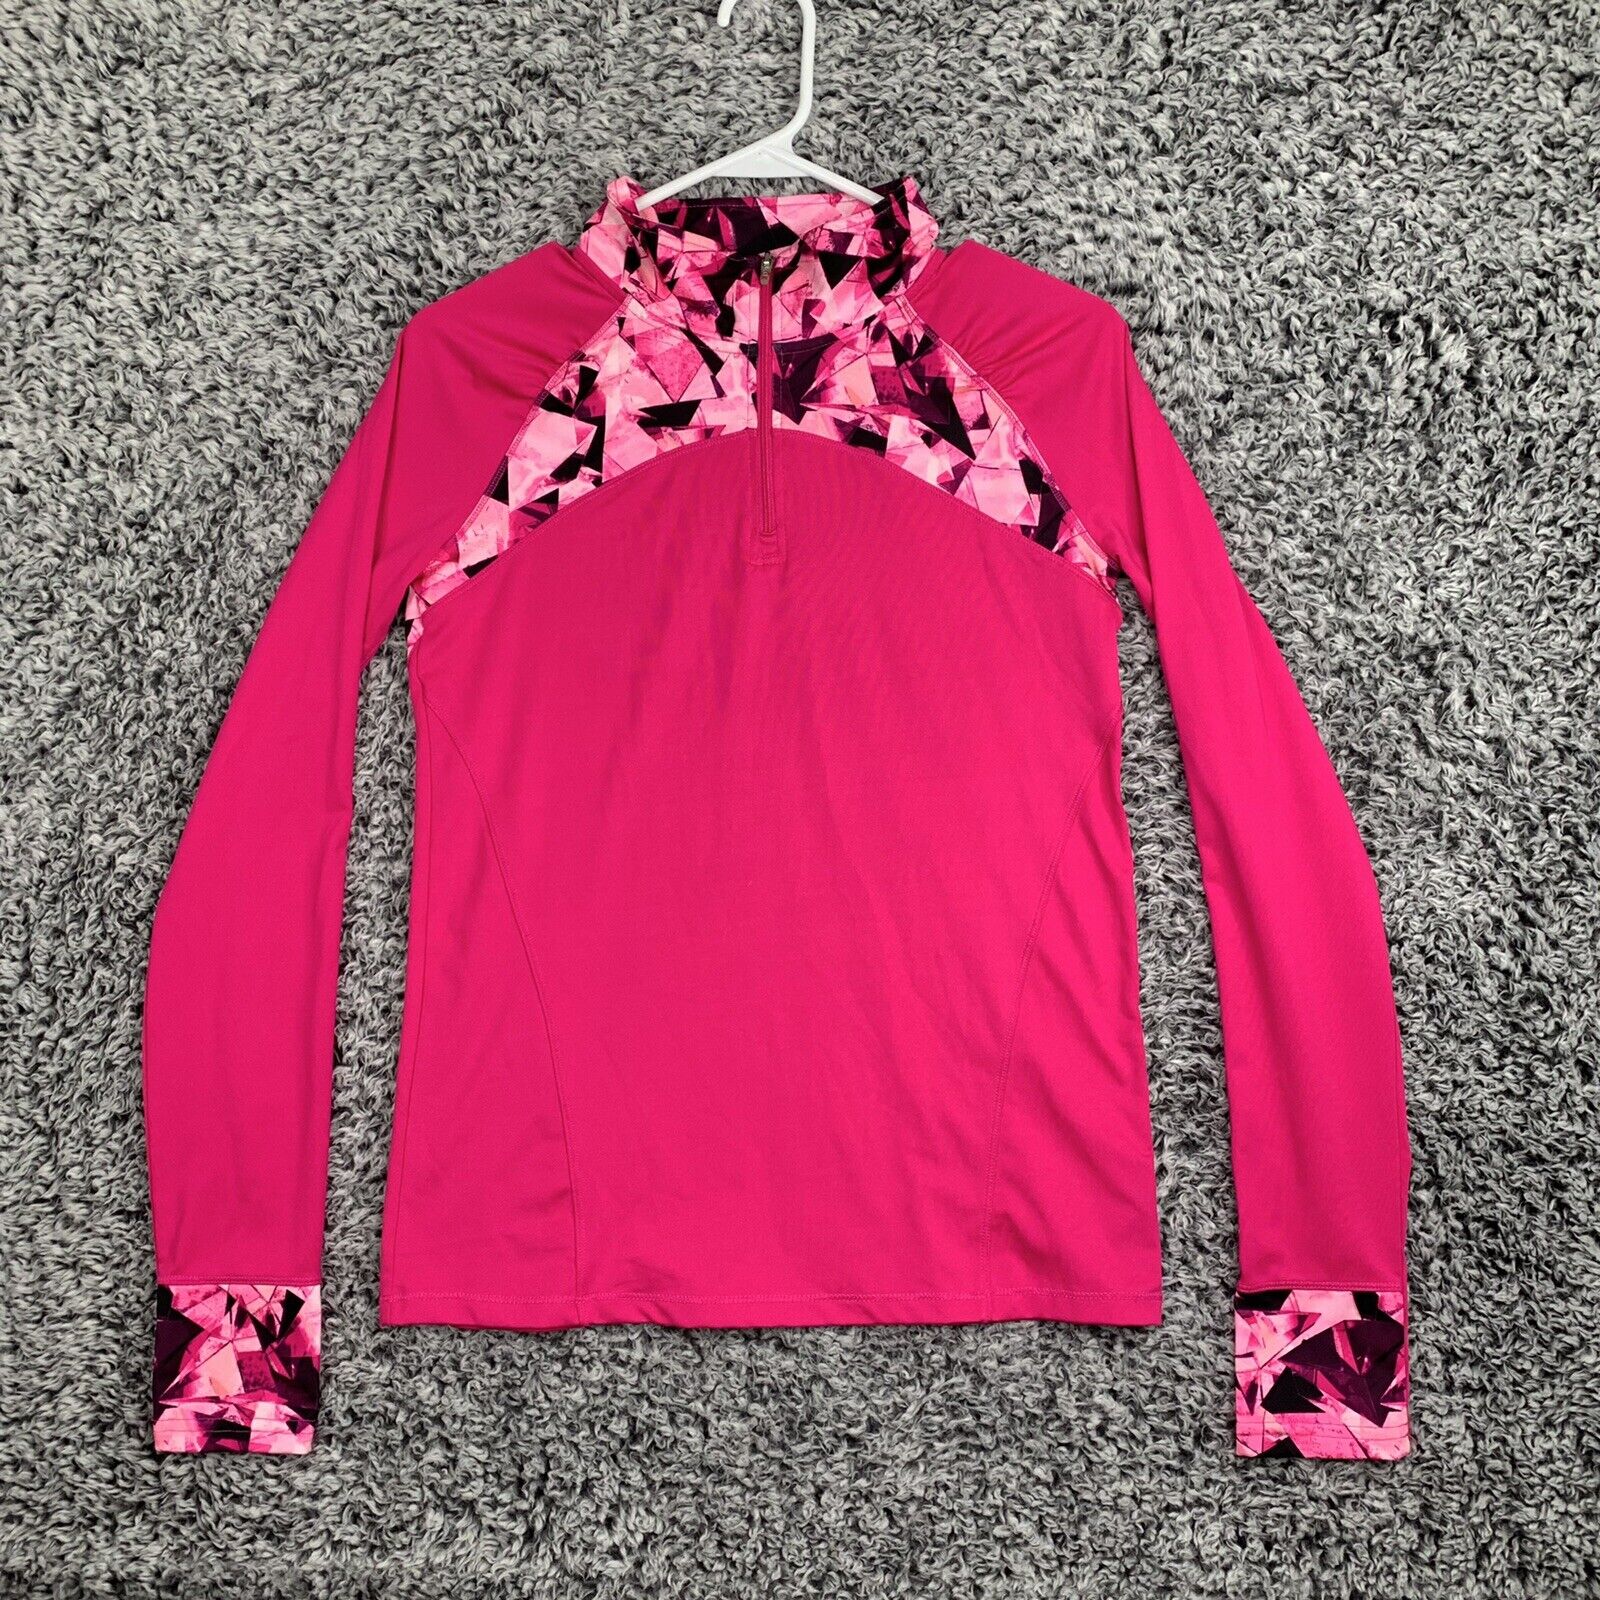 CHAMPION L/S PINK AND GEOMETRIC PRINT 1/4 ZIP PULLOVER GIRL S SIZE XL (14-16)